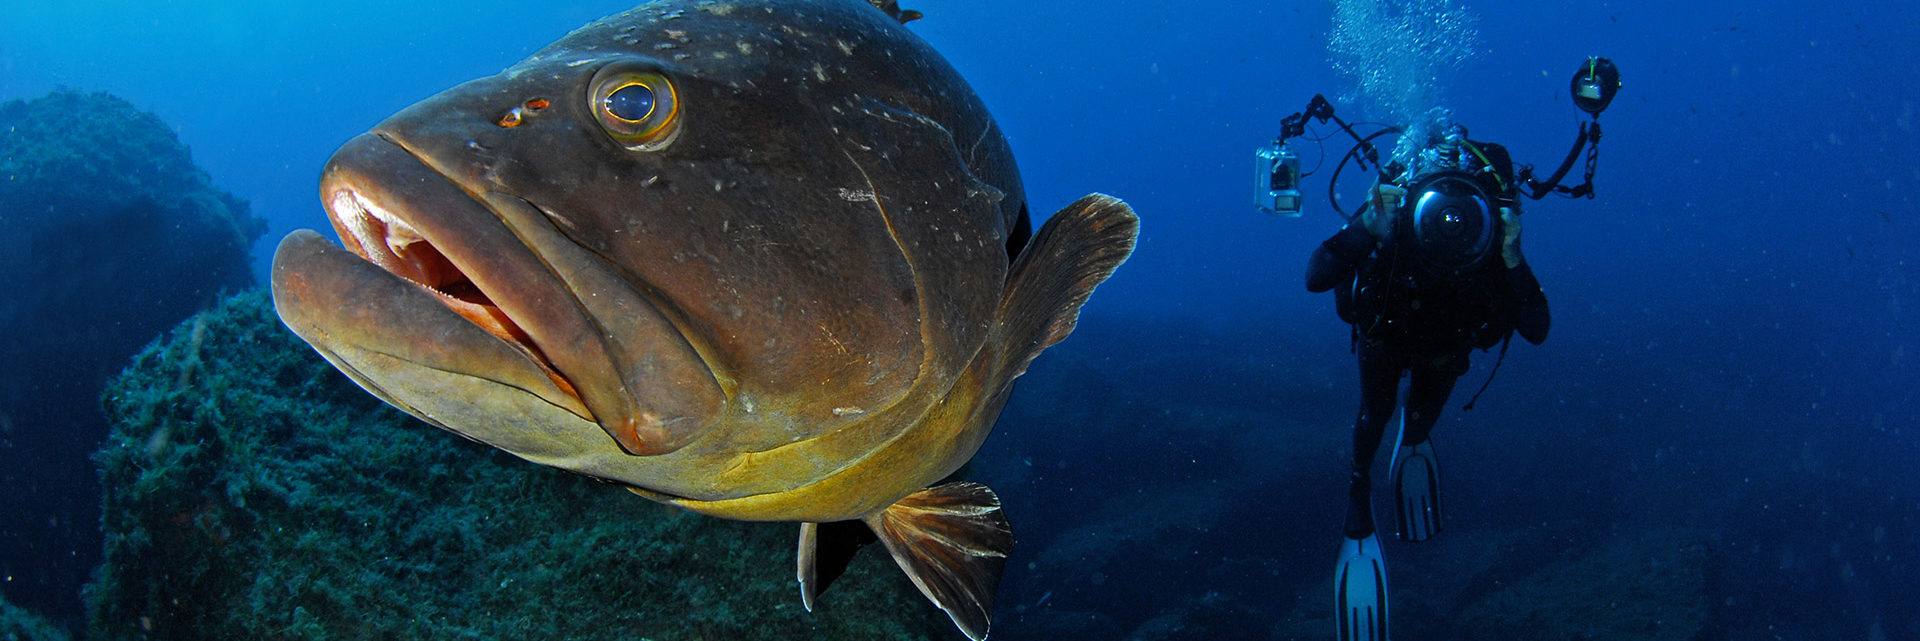 Brown grouper fish and diver